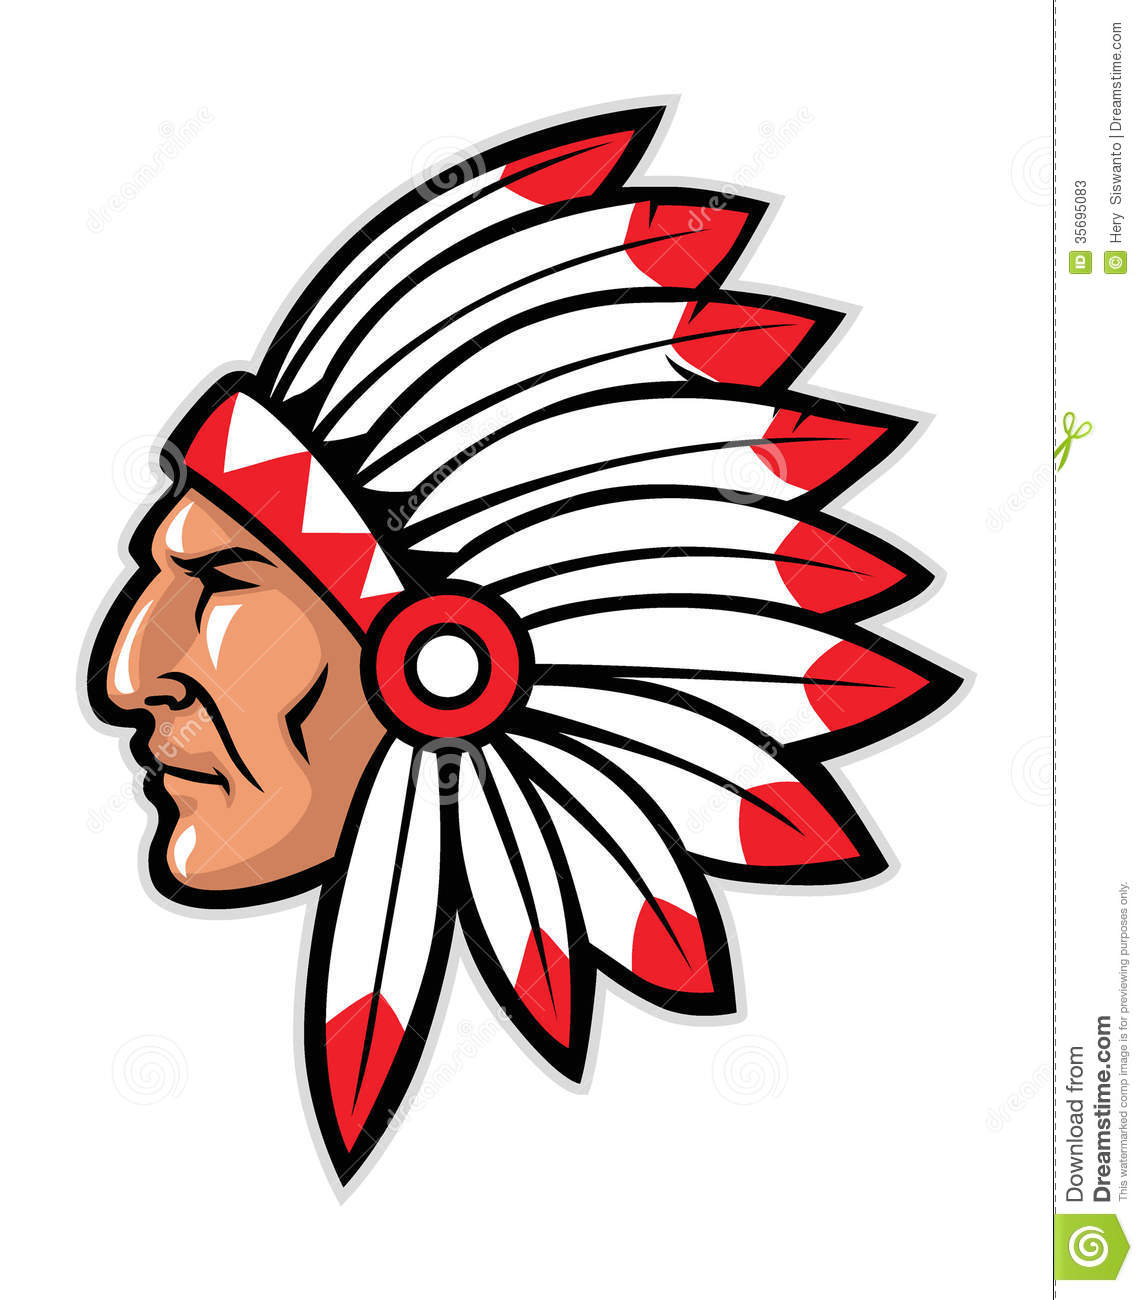 American Indian Clipart - Cli